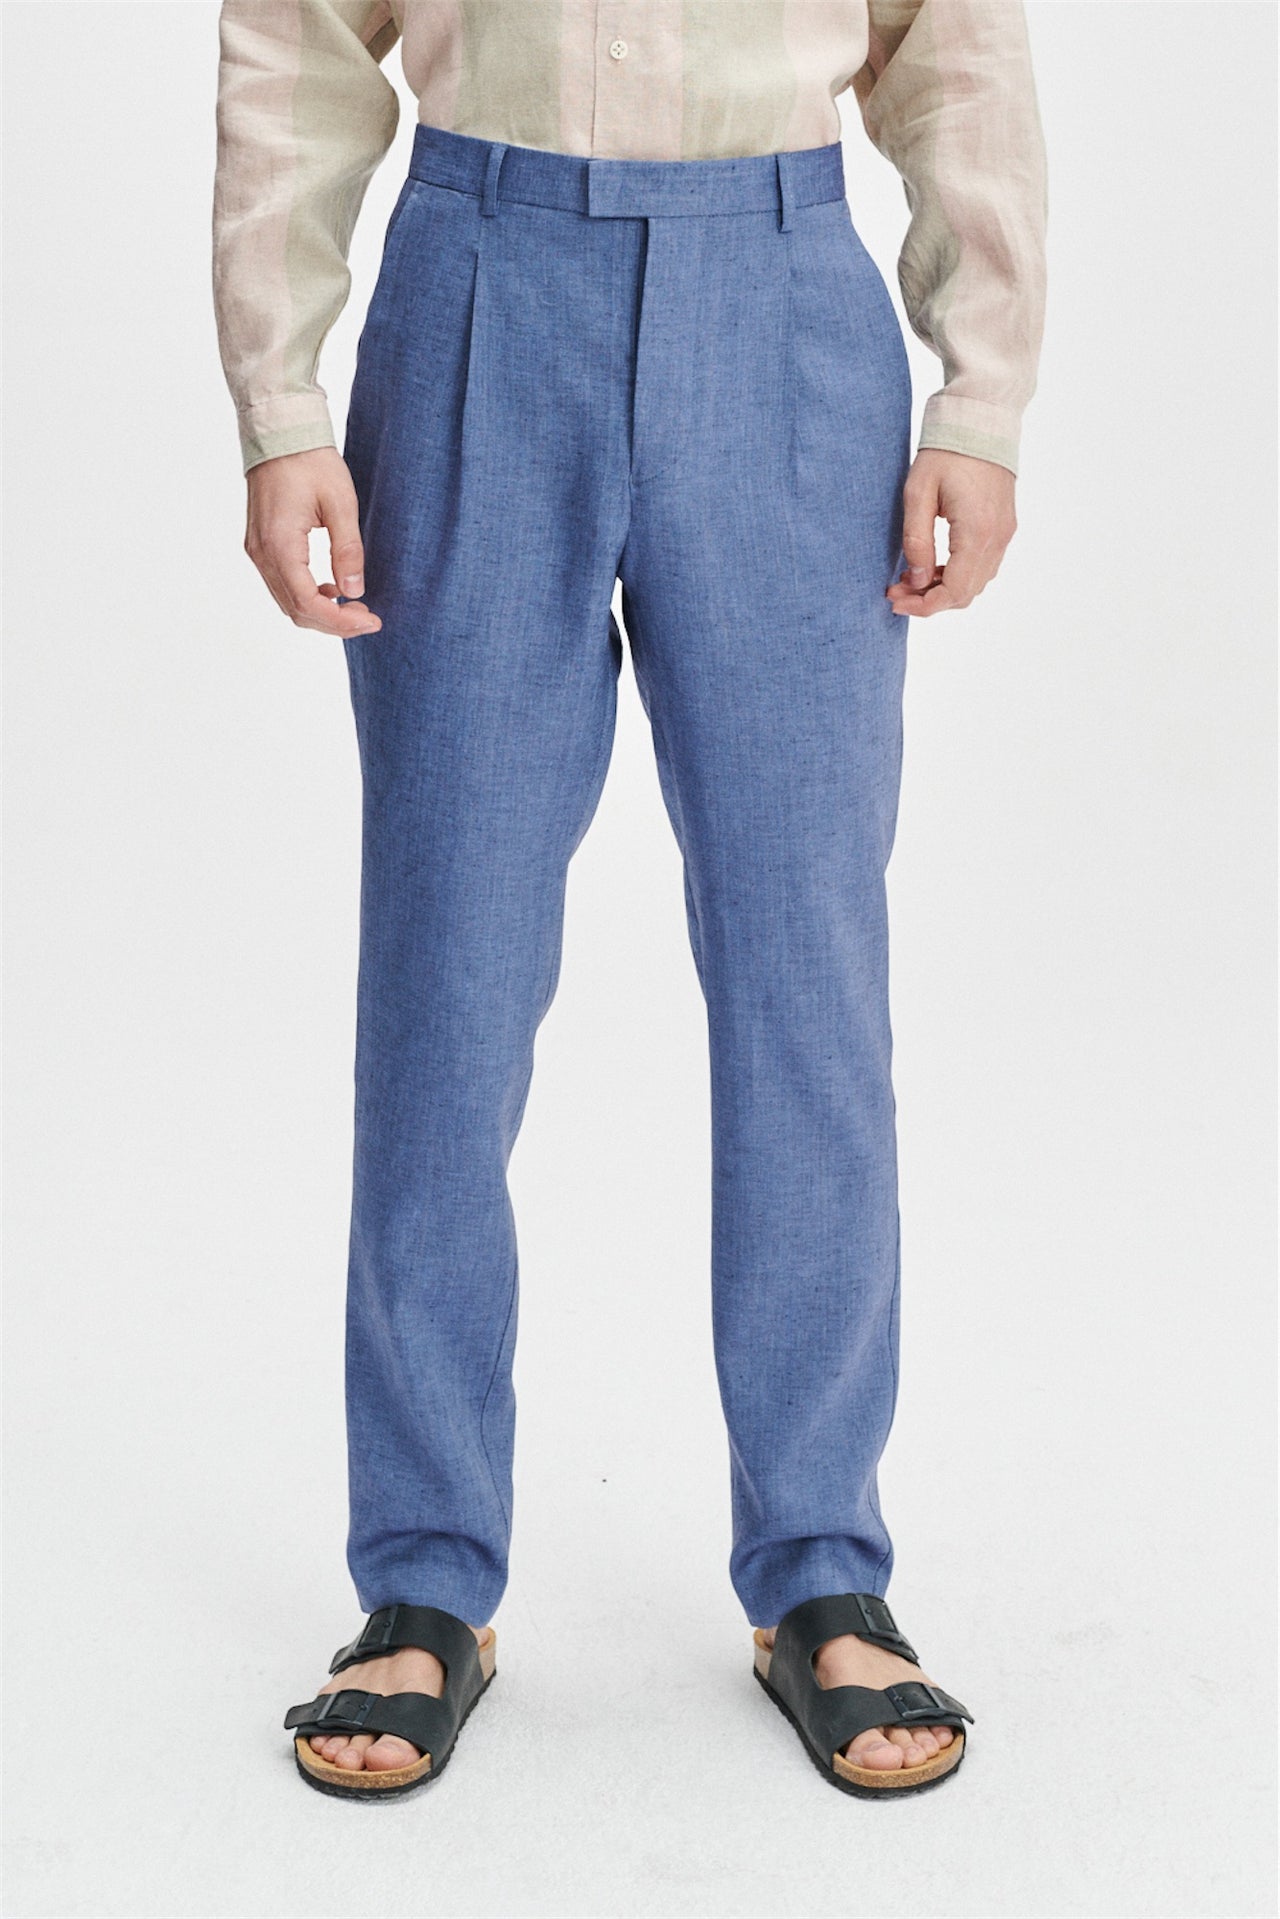 Bohemian Trousers in a natural stretch navy and pilot blue Italian traceable linen